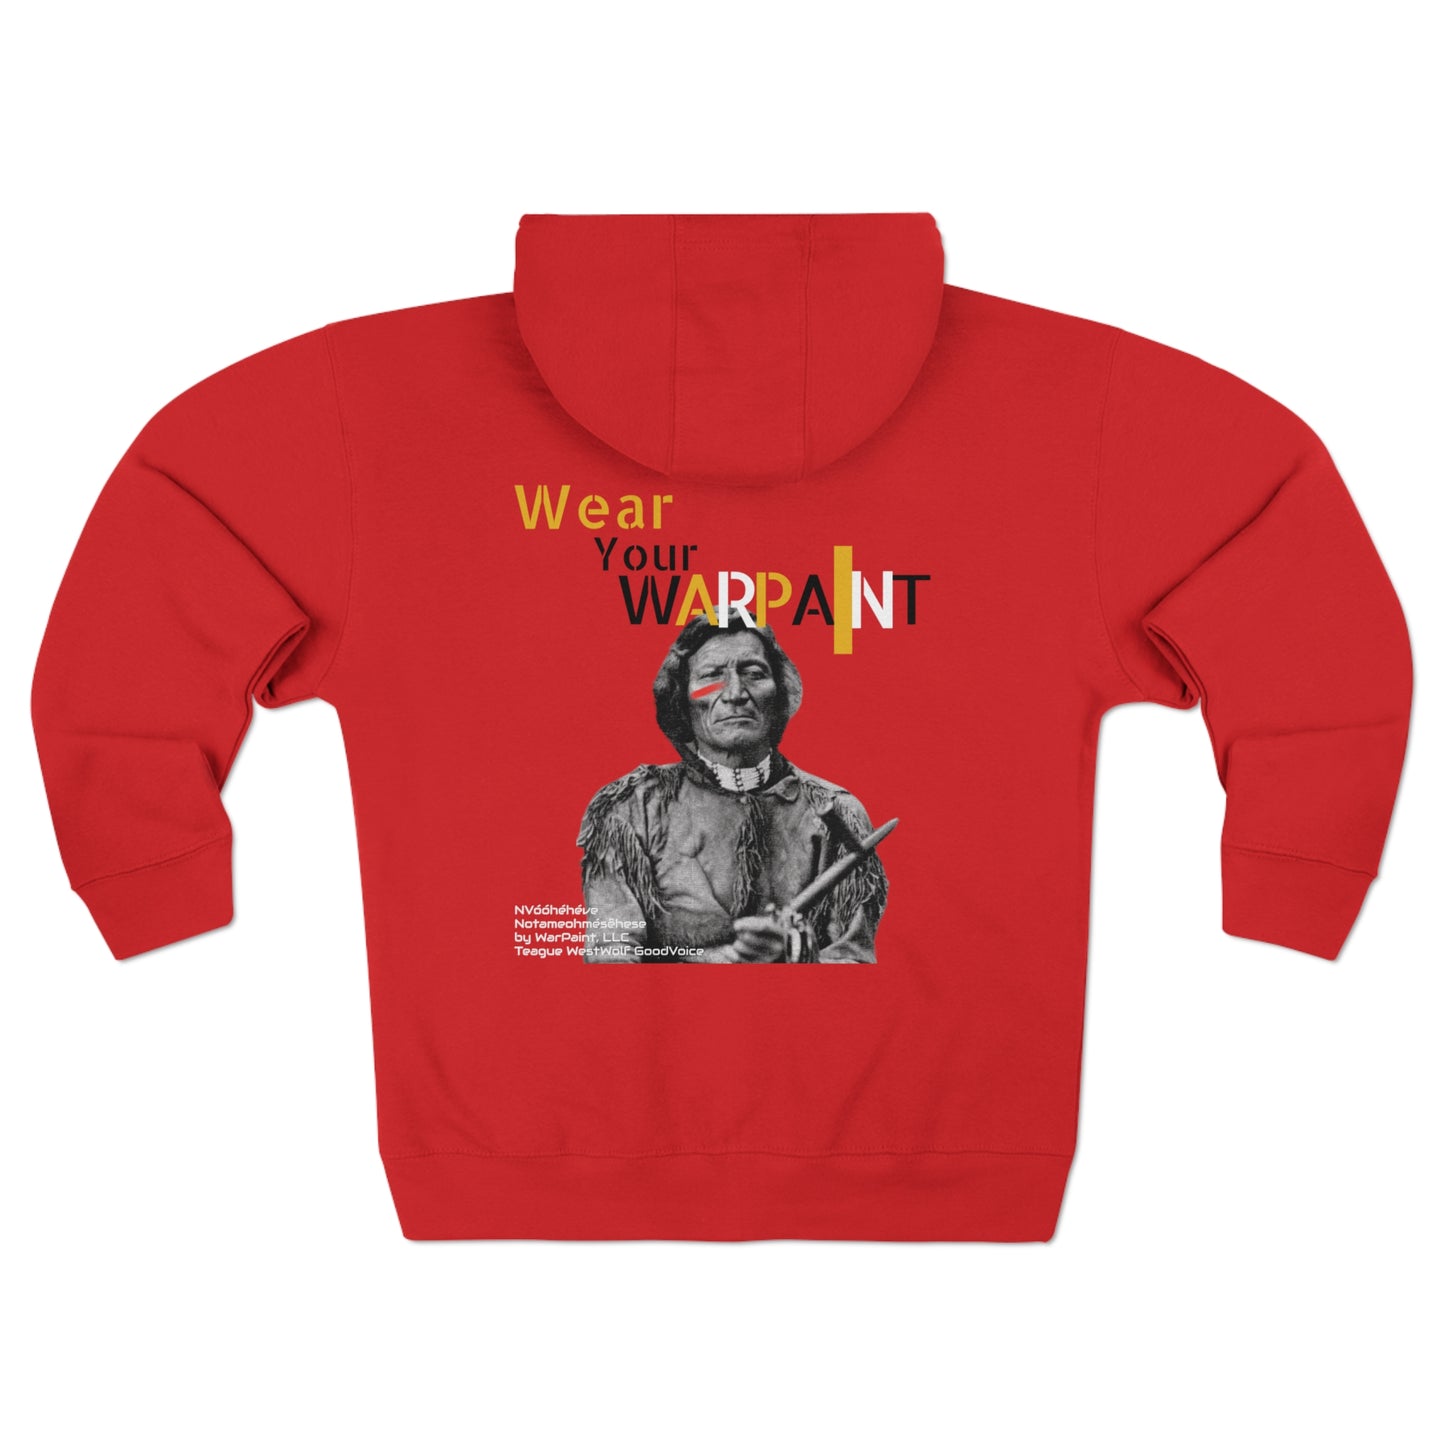 Vóóhéhéve (Morning Star) Aka Chief Dull Knife of the Notameohmésêhese (Northern Eaters) also known as Northern Cheyenne by the Government by Teague WestWolf GoodVoice (Amskapii Pikuni) - Unisex Zip Hoodie